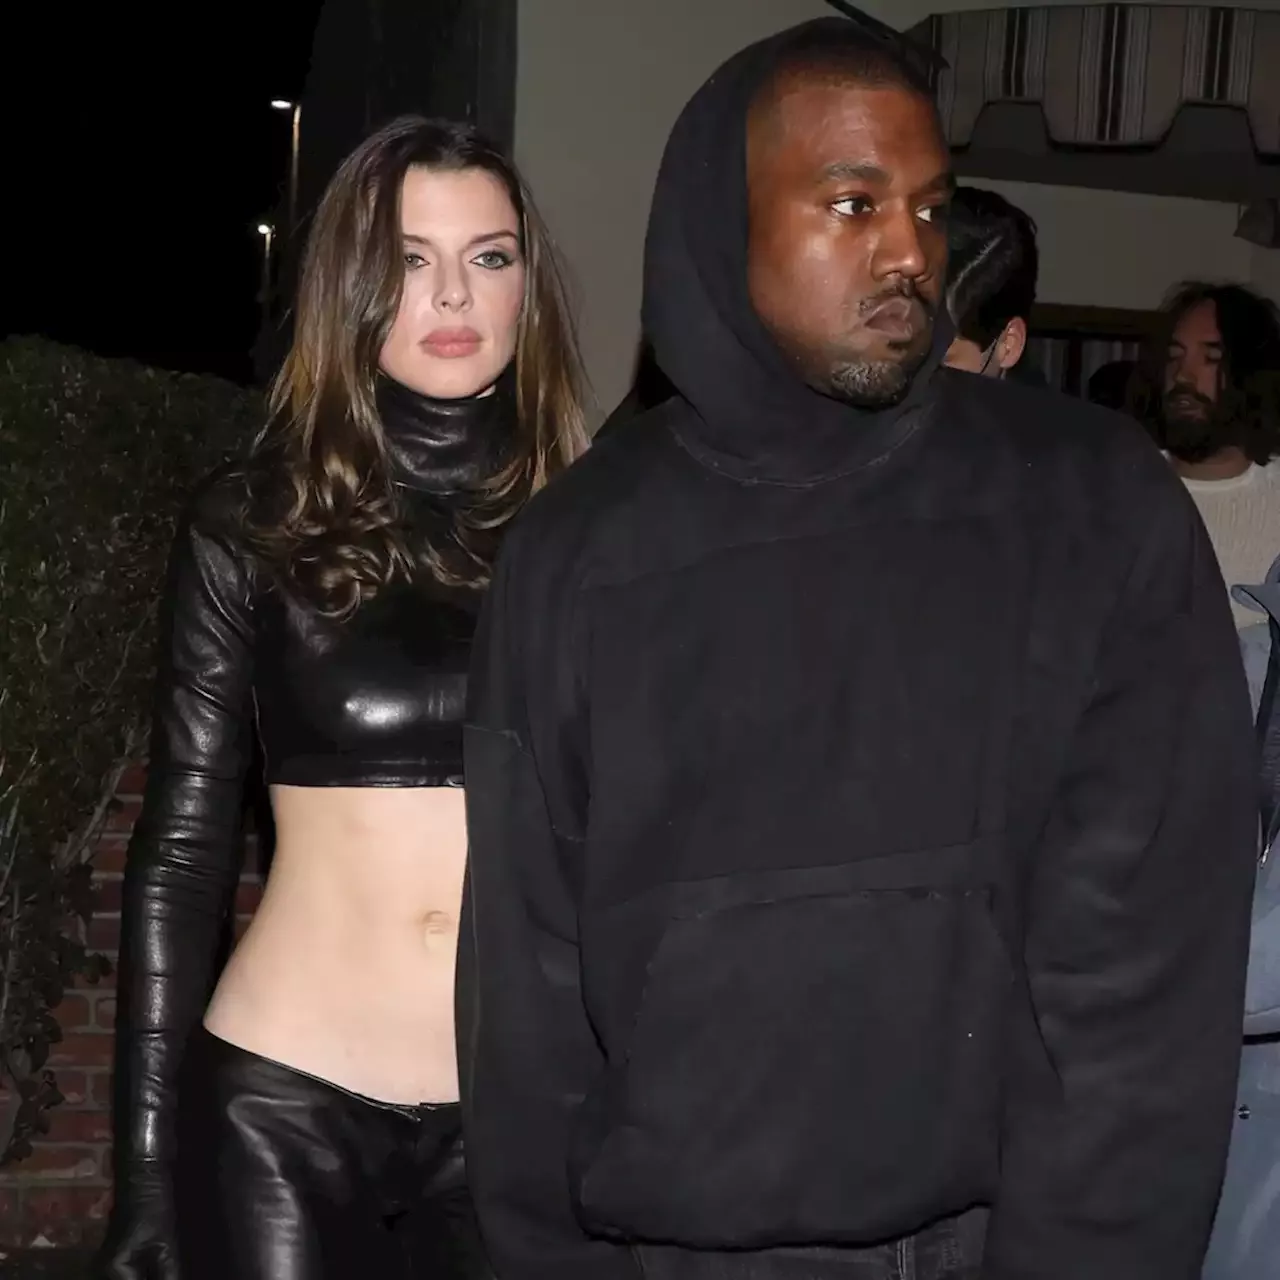 Julia Fox Insists She’s Not Dating Kanye West For “Fame” Or “Money” - E! Online